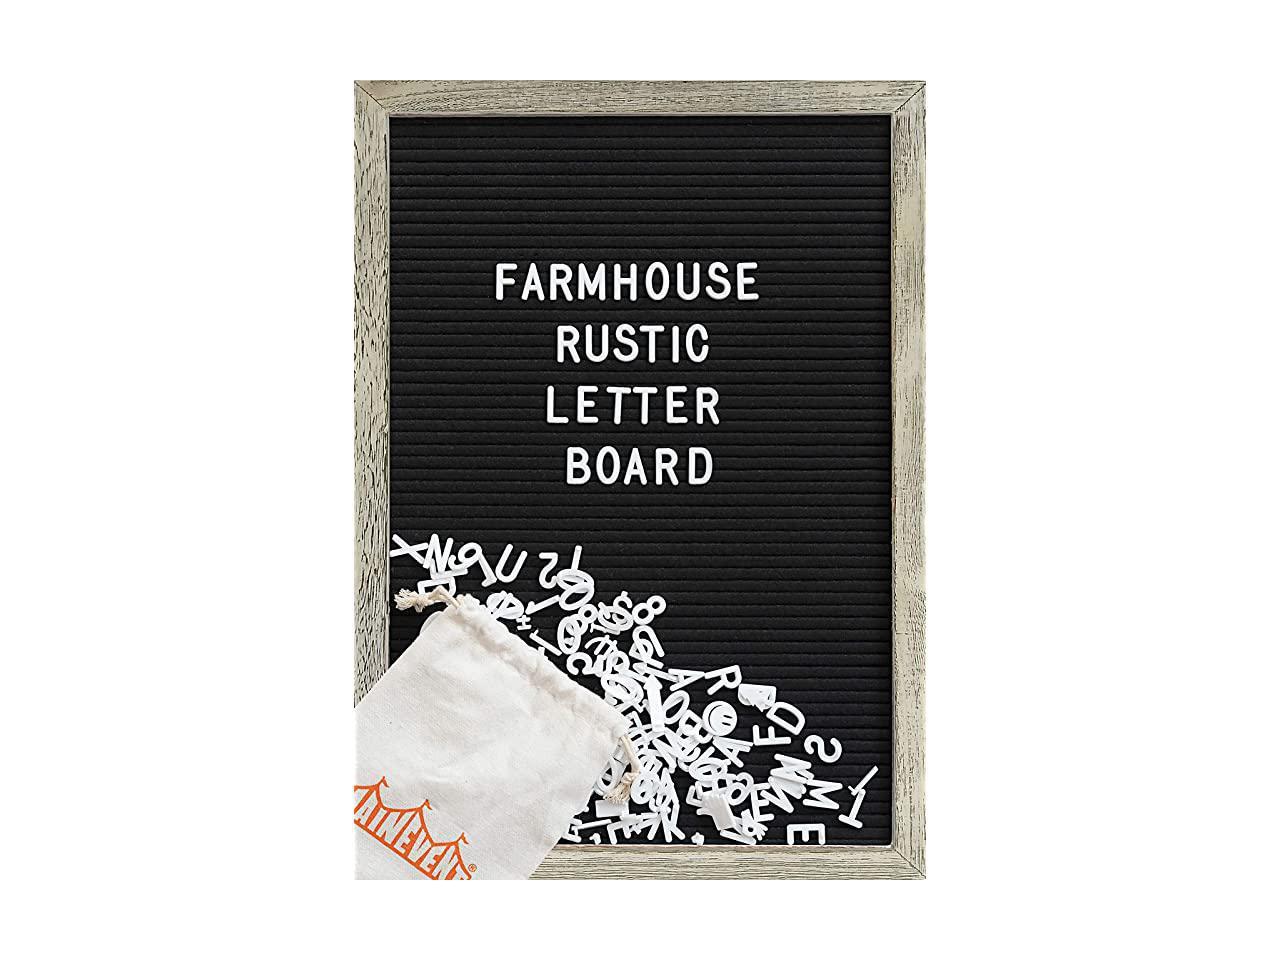 Great Shabby Chic Vintage Decor Message Wall Hook Farmhouse Wall Decor Felt Letter Board Black Felt with 374 Precut White Letters 10x10 Inch Rustic Wood Frame Canvas Bag Stand 